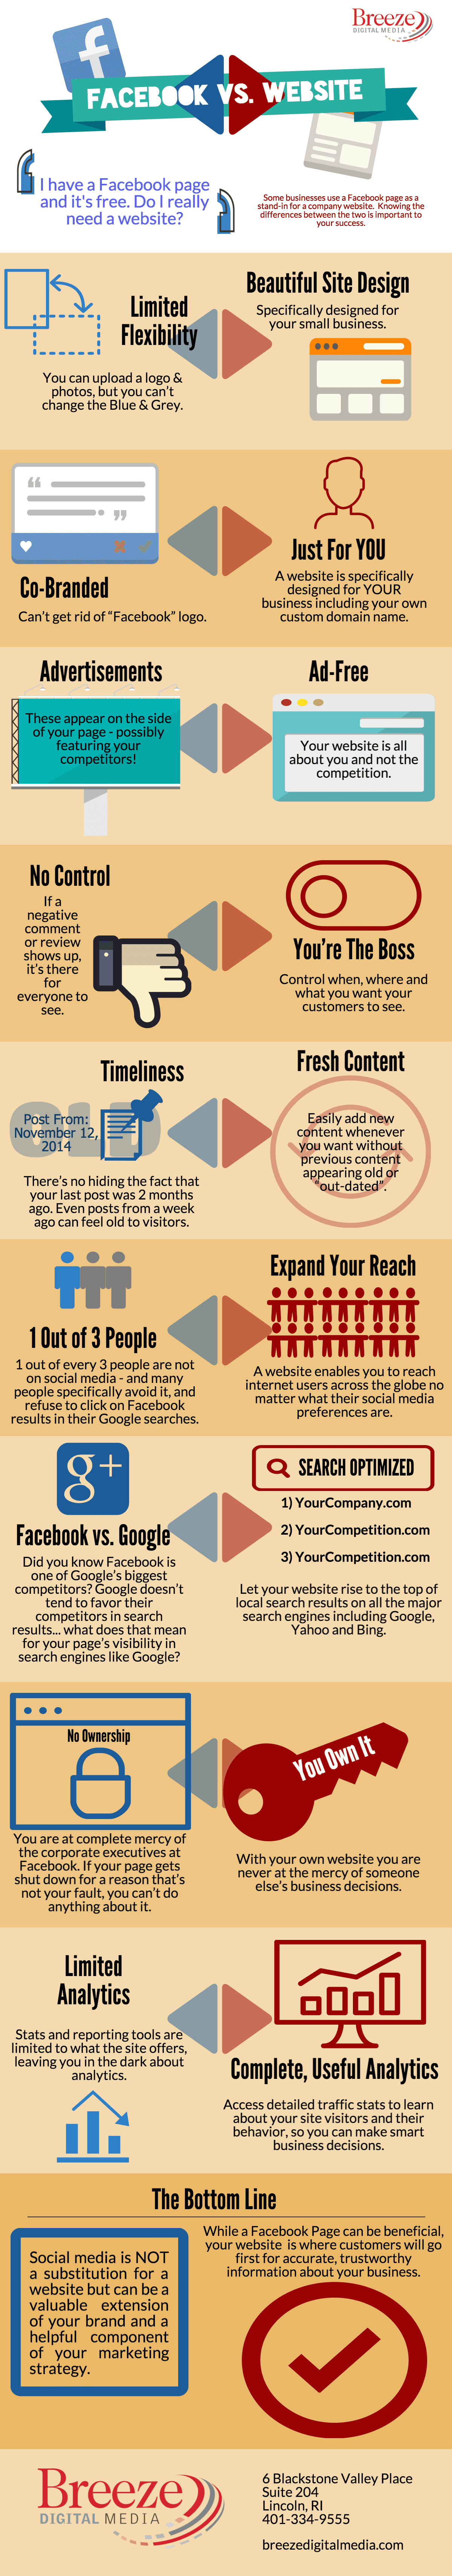 Facebook Page vs. A Website - Infographic